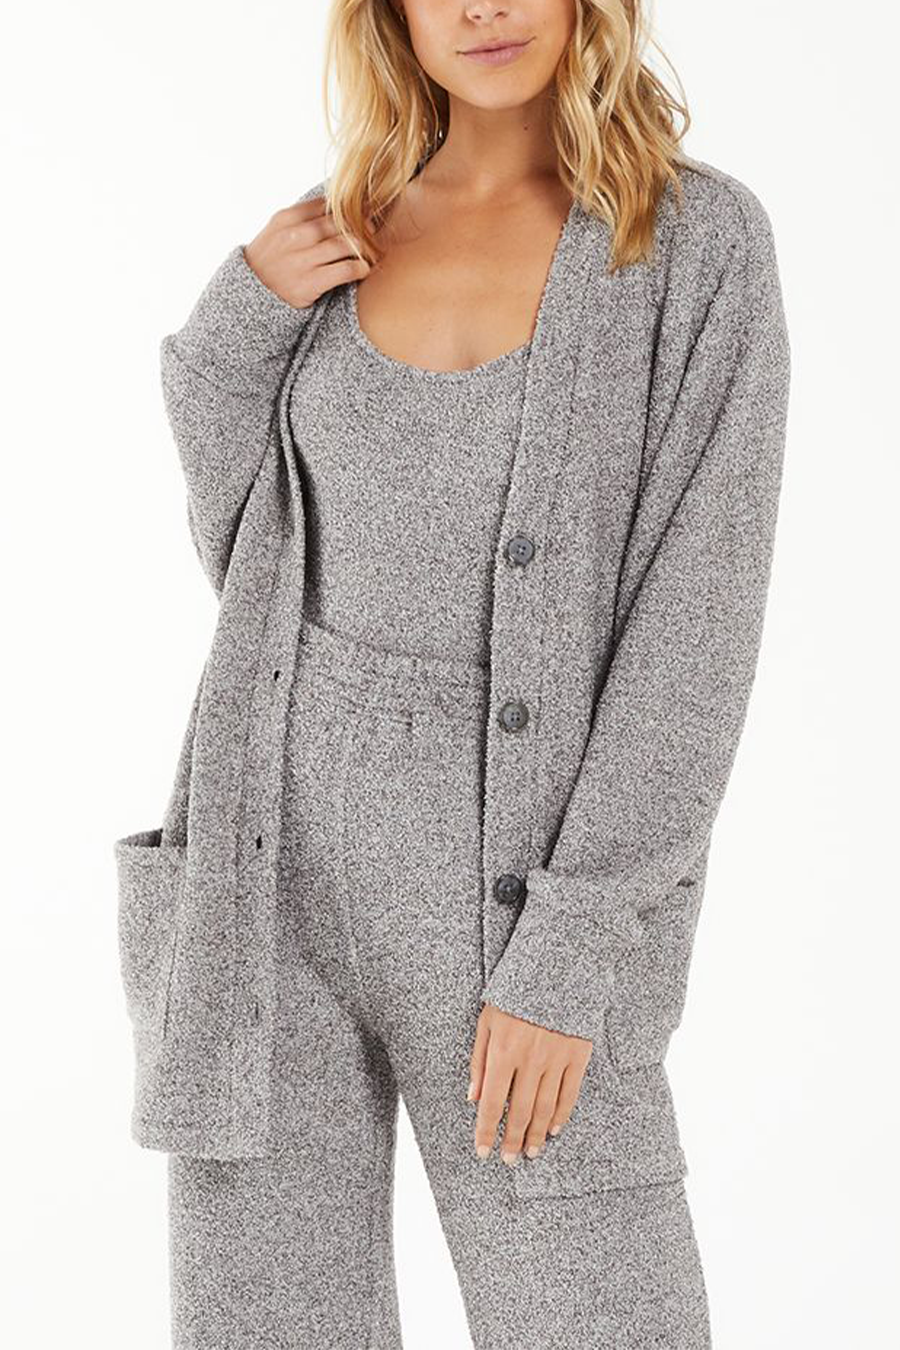 The Coziest Cardigan | Heather Slate - Main Image Number 1 of 1